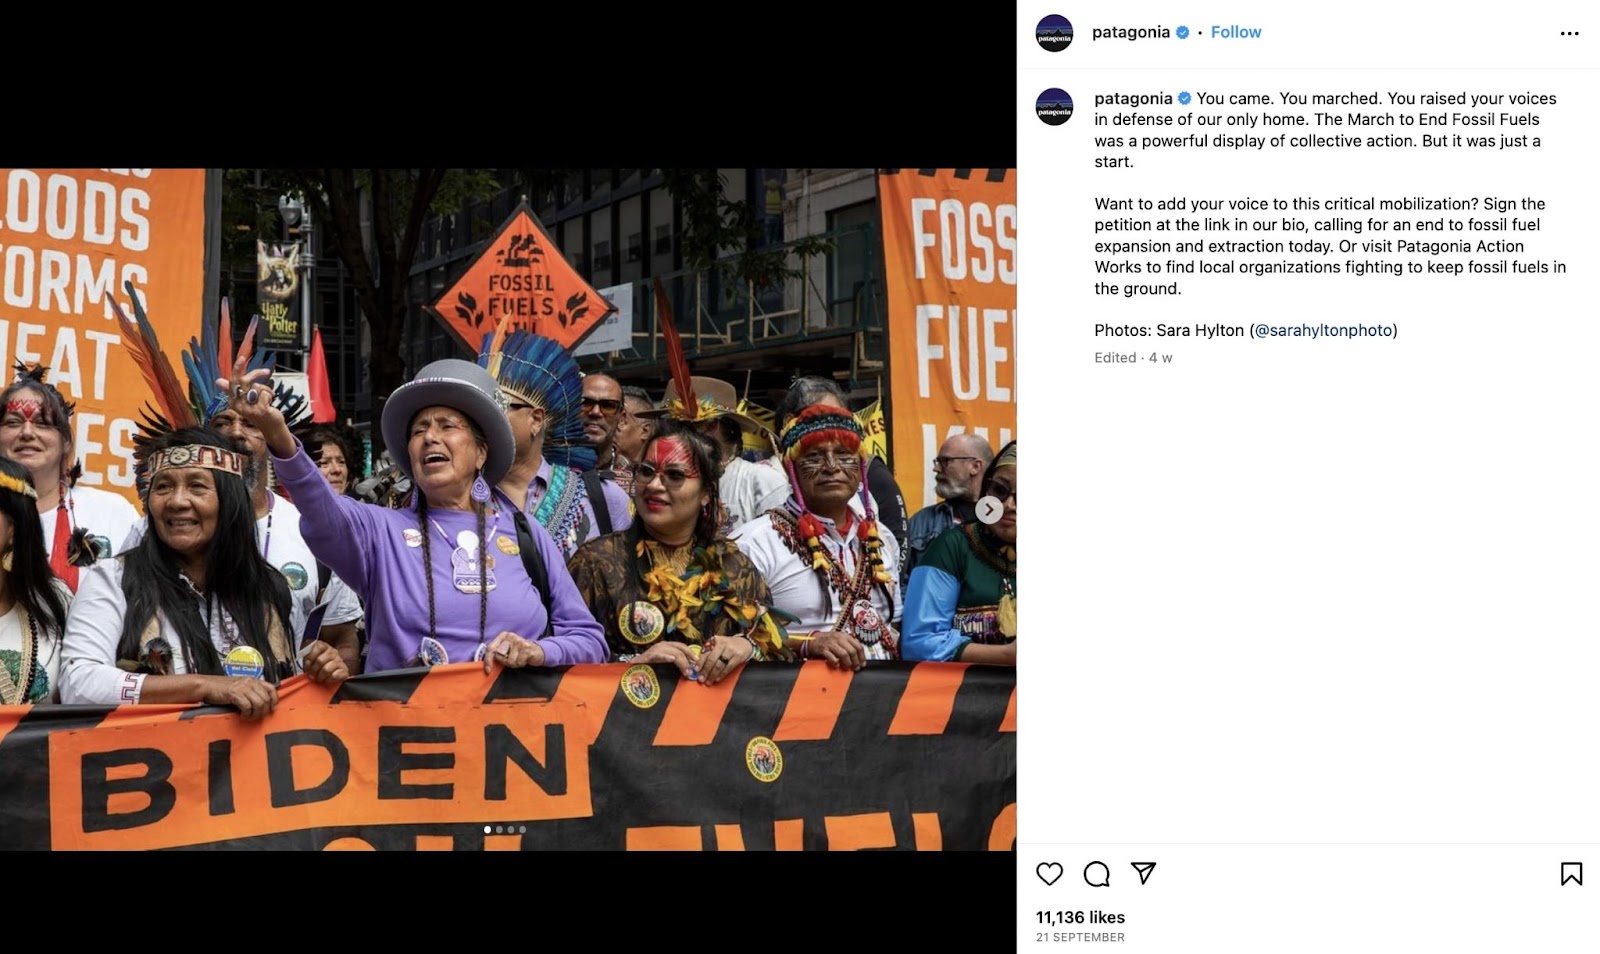 Patagonia's Instagram post from March to End Fossil Fuels protest